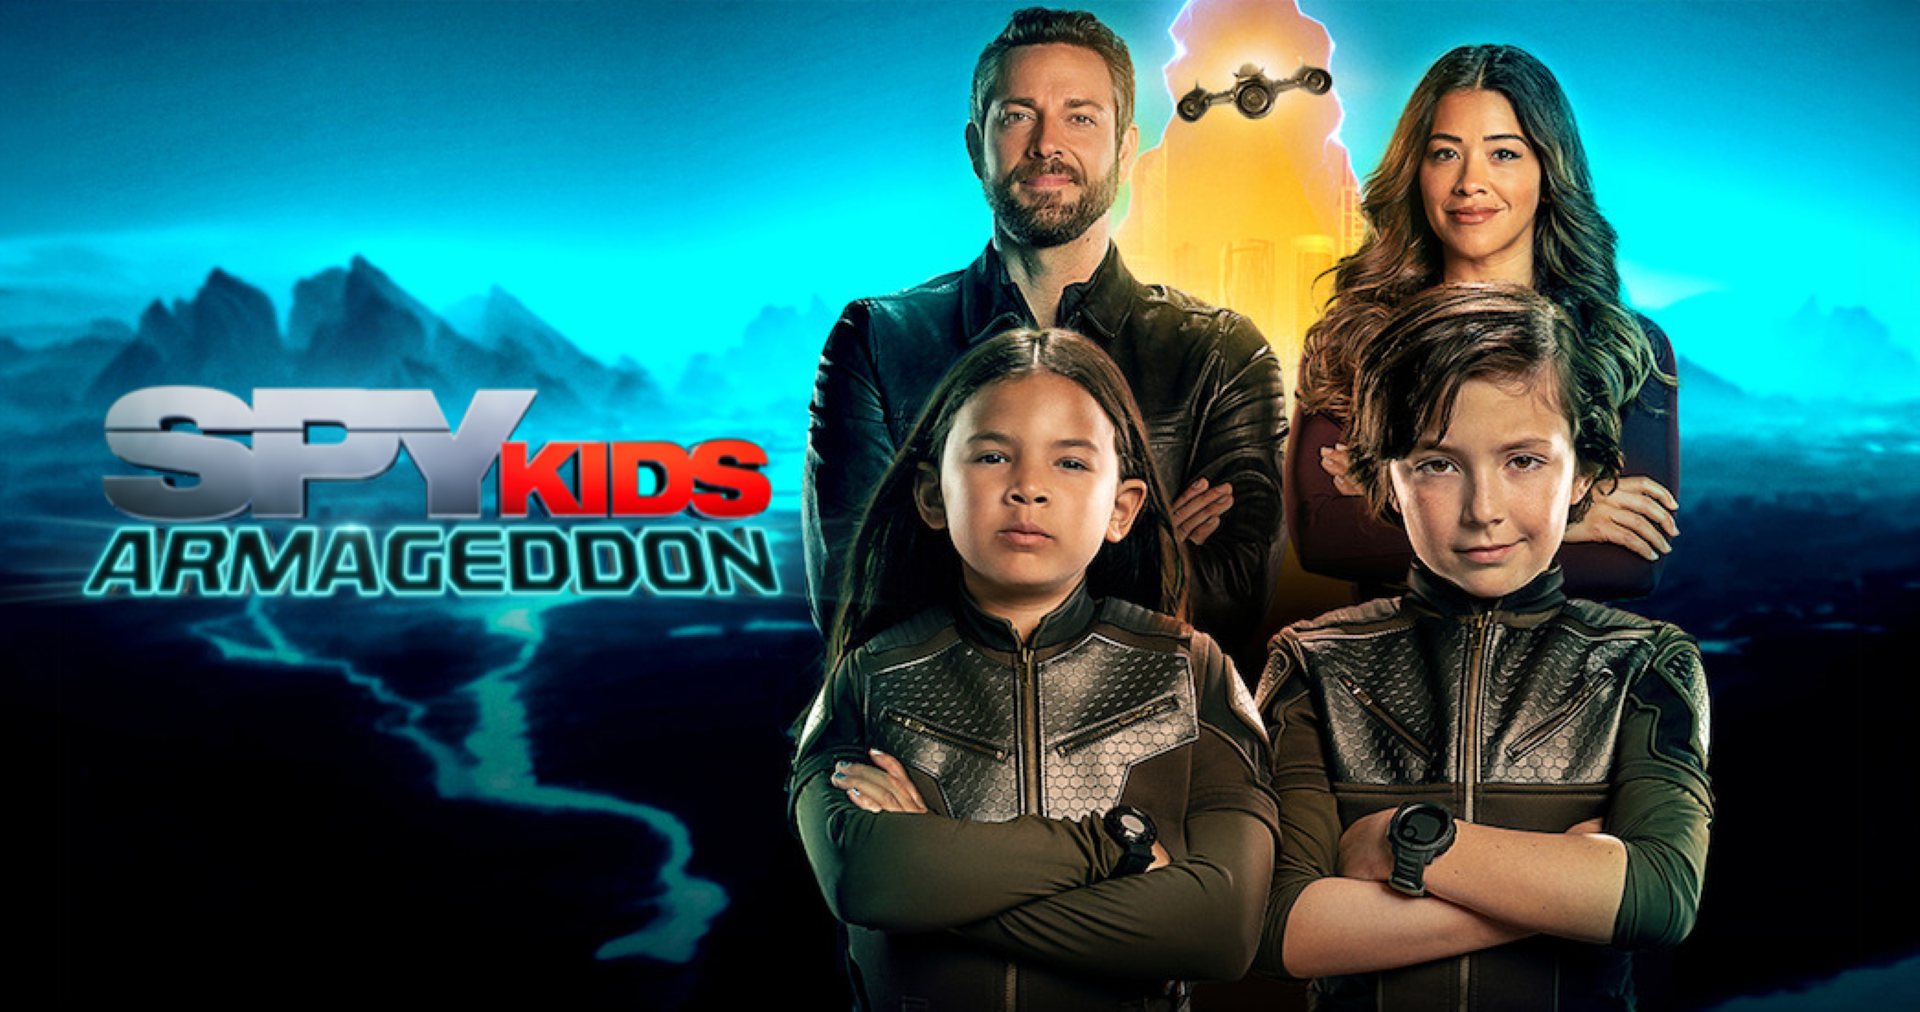 New on Netflix: Dive Into the Latest 'Spy Kids' Adventure and Where to Binge the Whole Series